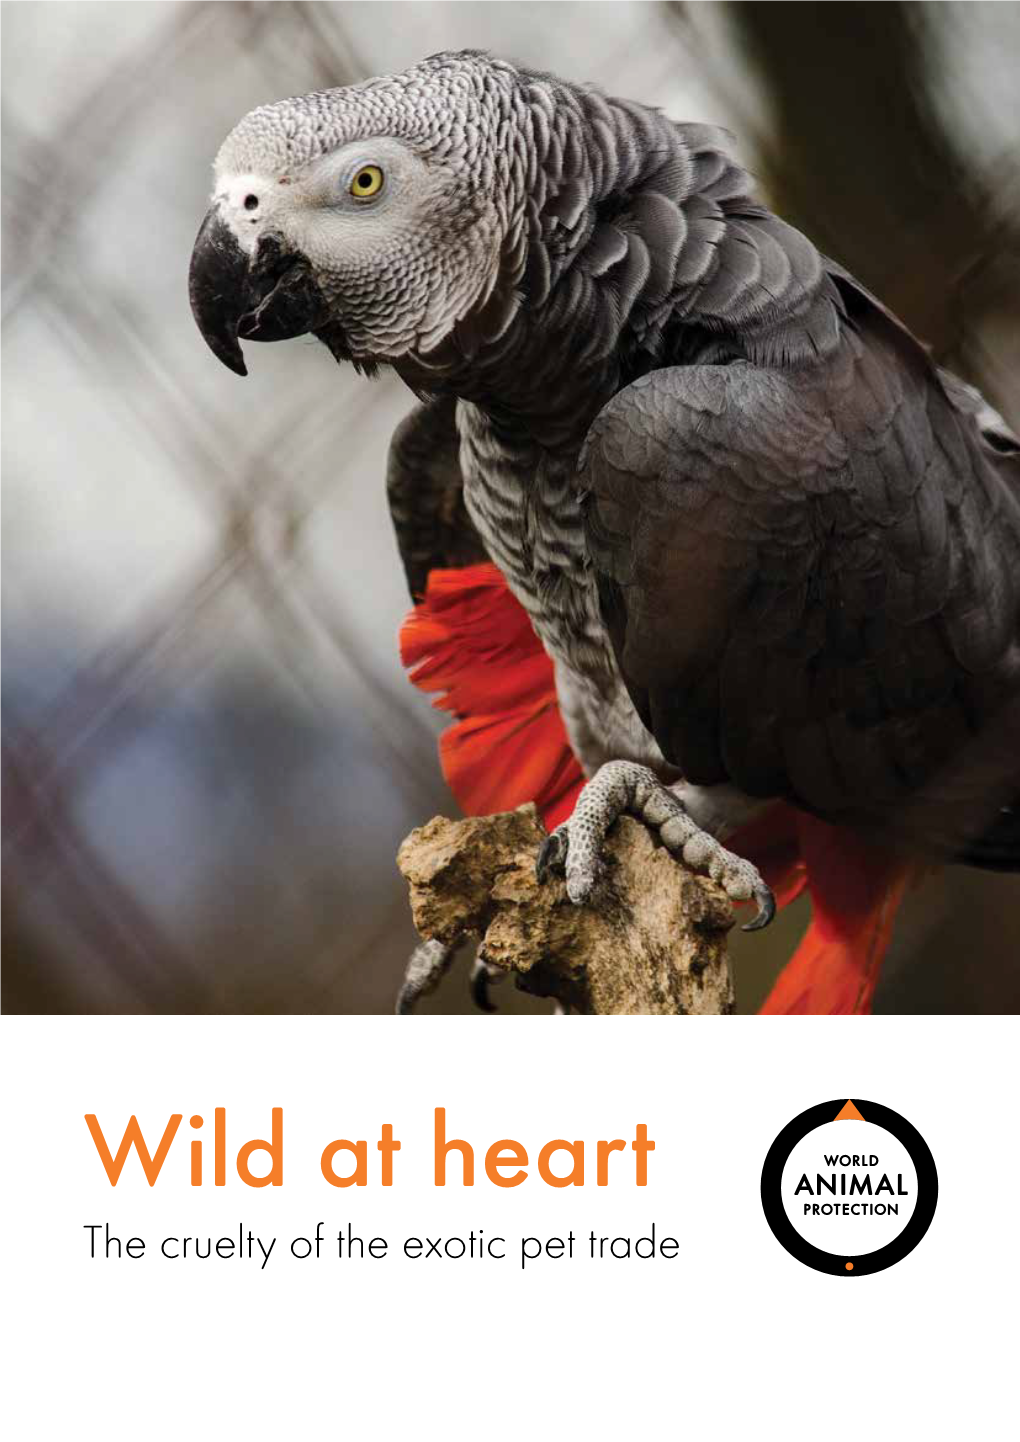 Wild at Heart the Cruelty of the Exotic Pet Trade Left: an African Grey Parrot with a Behavioural Feather-Plucking Problem, a Result of Suffering in Captivity